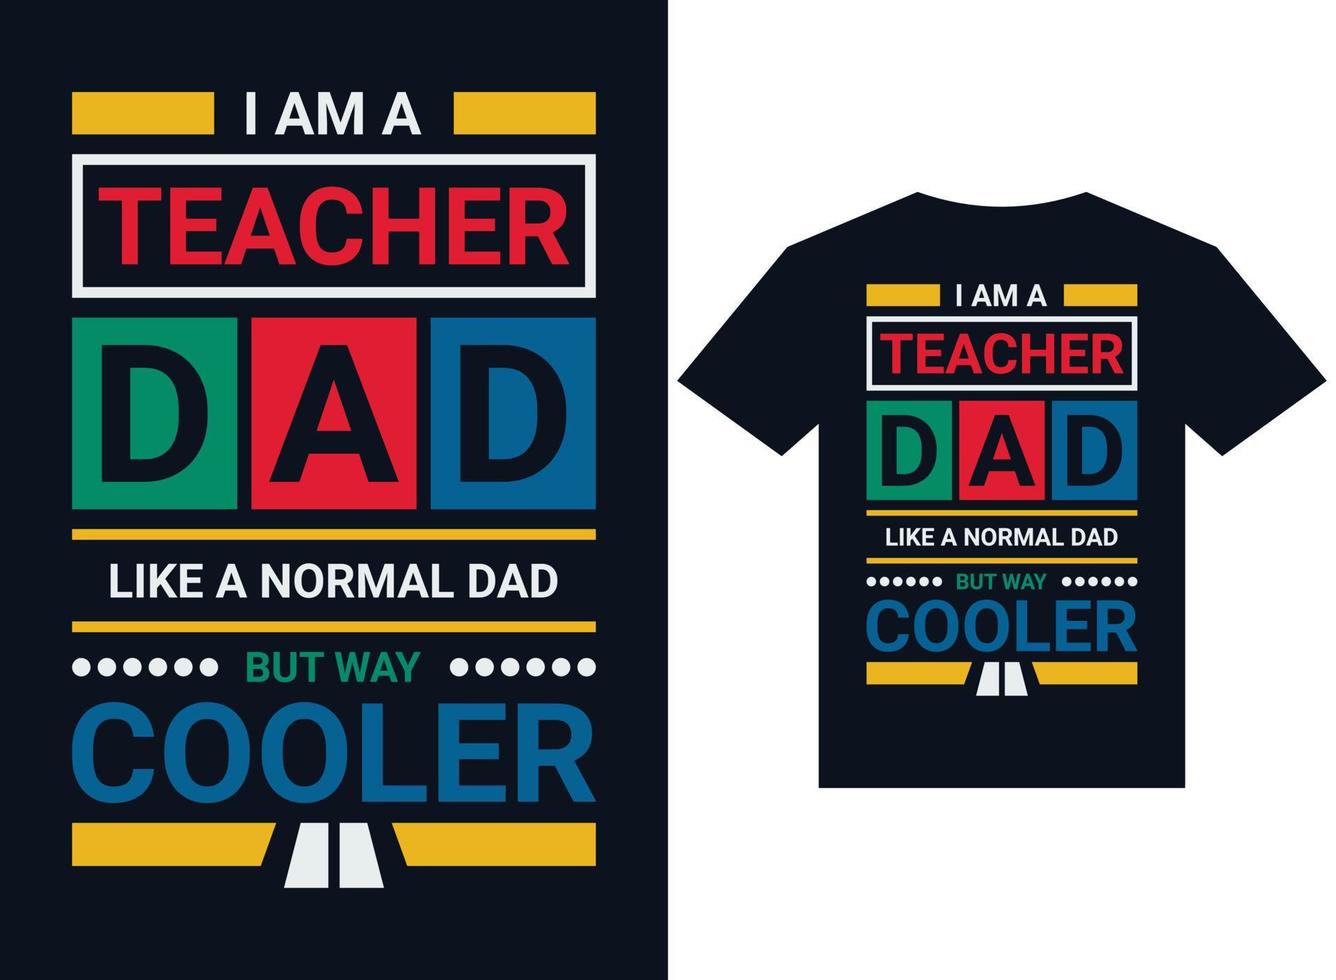 i am a teacher dad like a normal dad but way cooler t-shirt design typography vector illustration files for printing ready